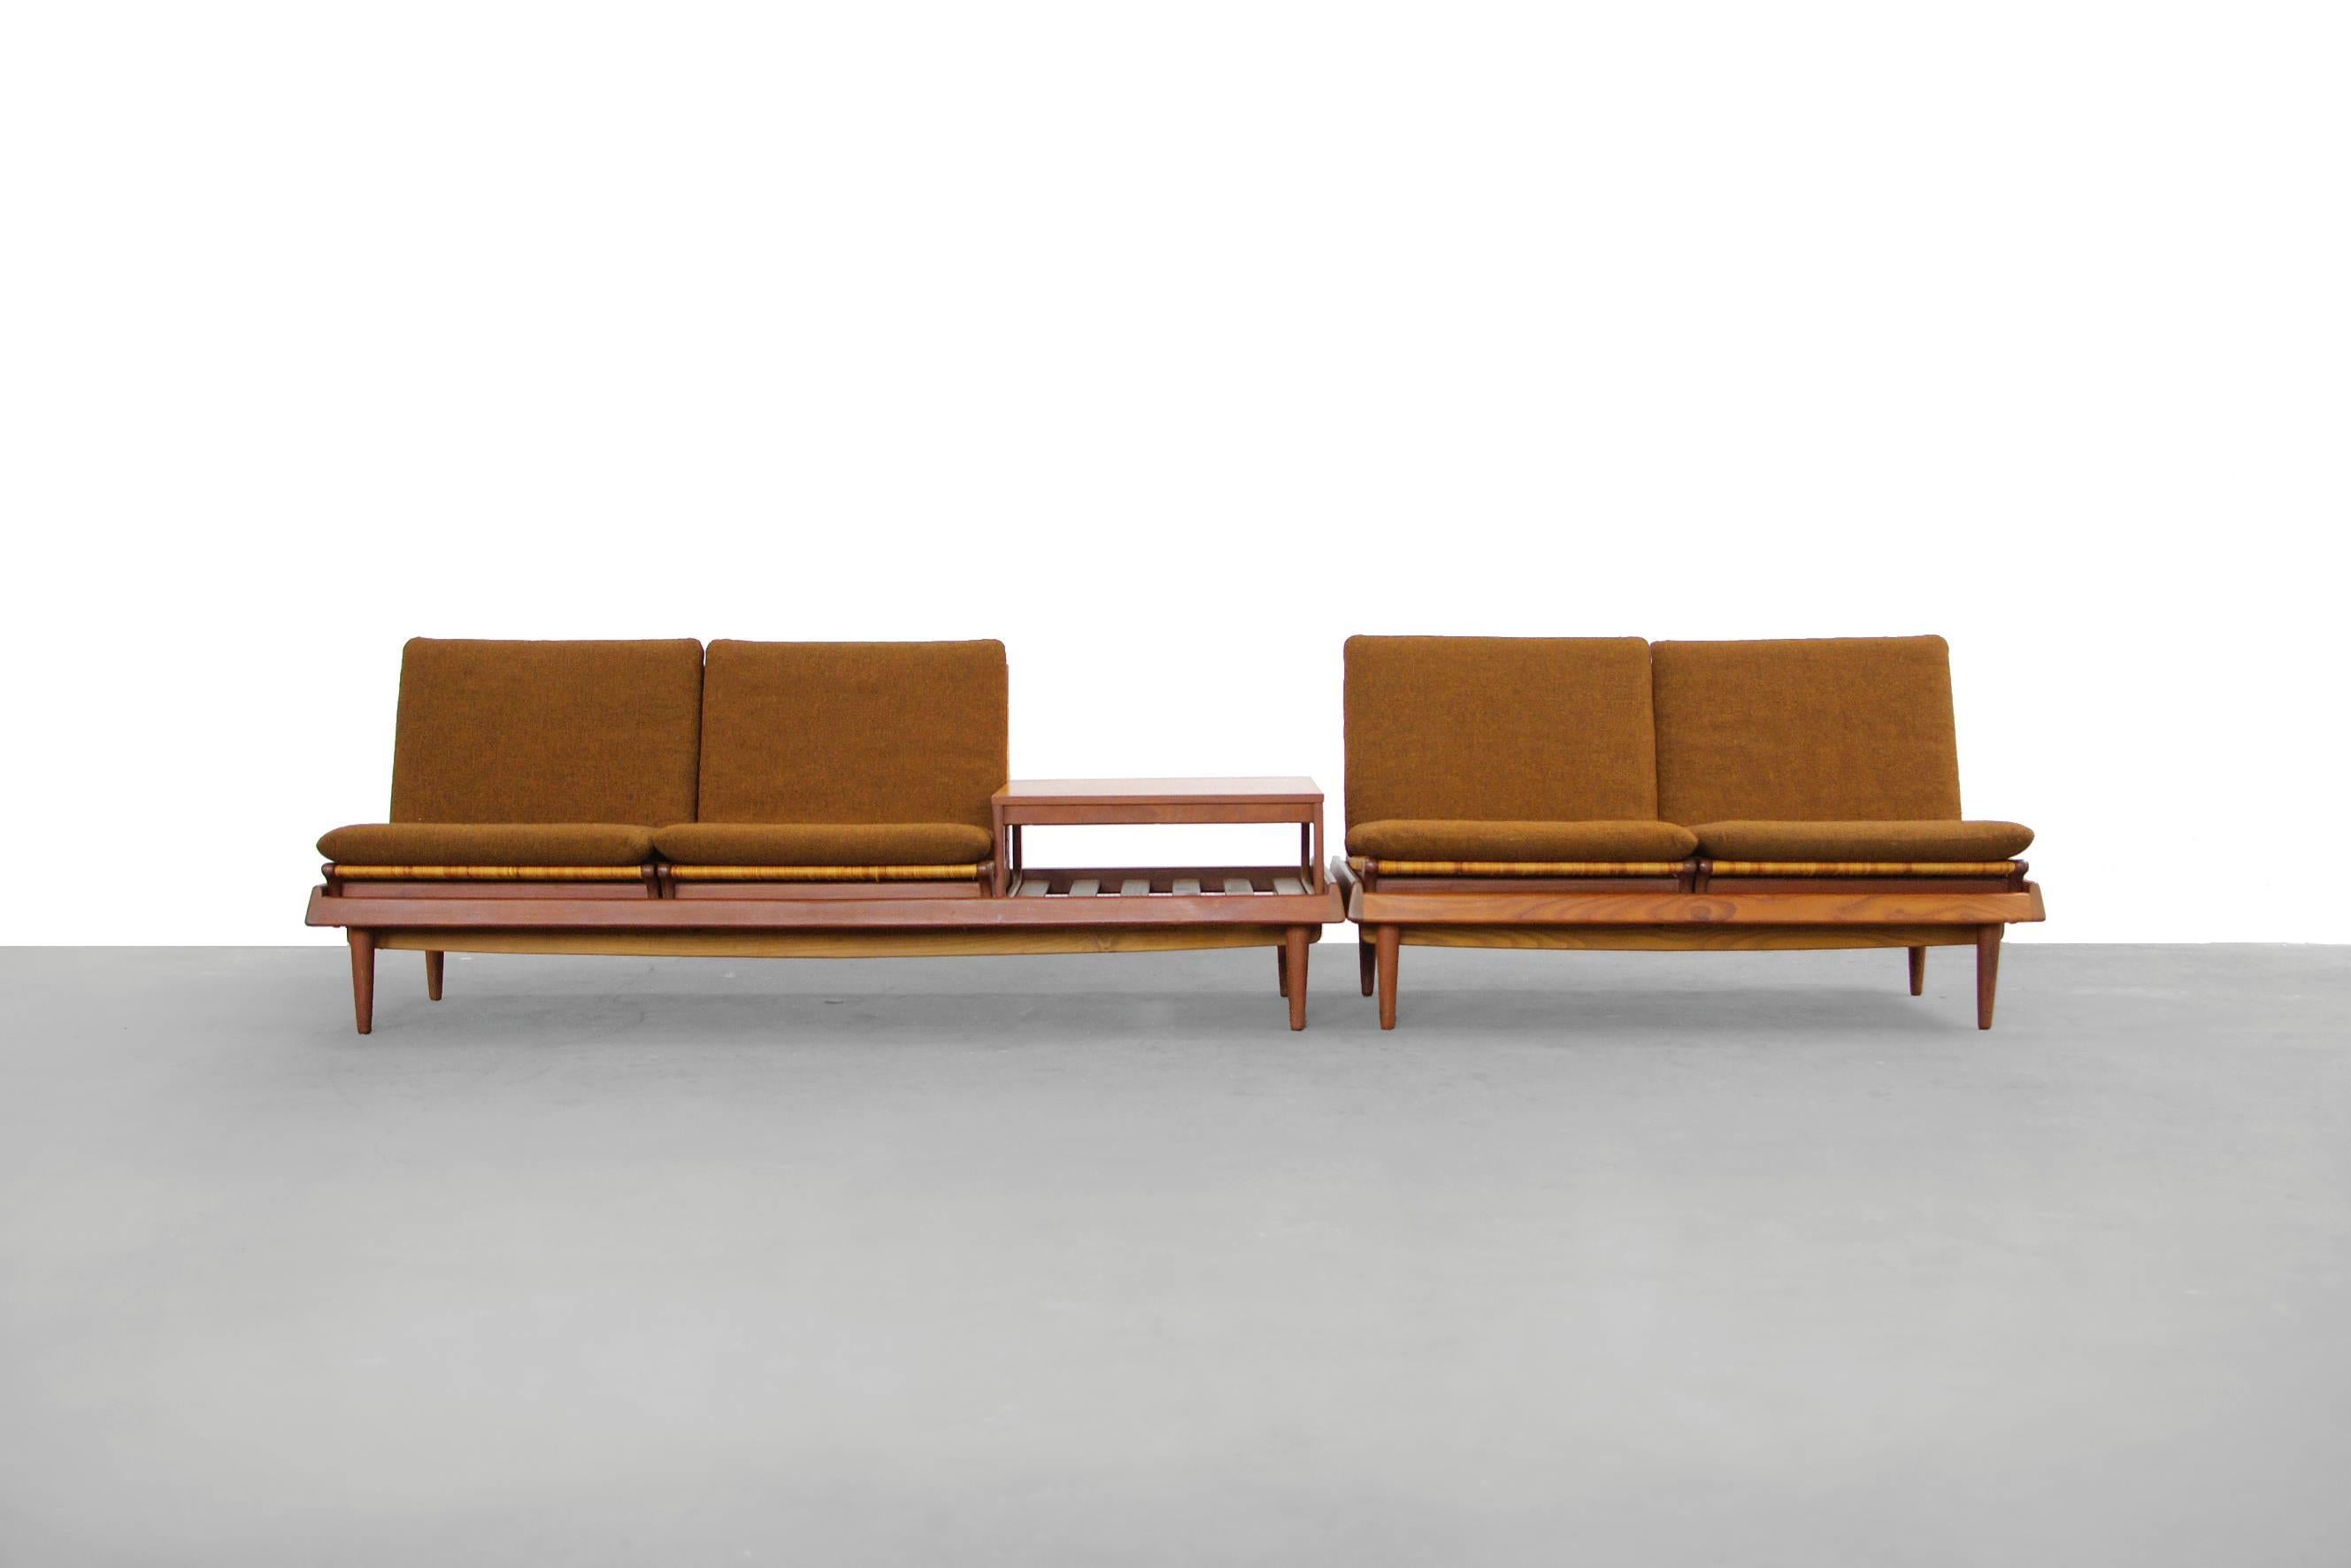 One of the most clever sofa systems of the Mid-Century era designed by Hans Olsen for Bramin.
This model TV161 was designed to be a universal solution to any seating in the home.
Beautiful details such as solid teak and the cane seats.
Original